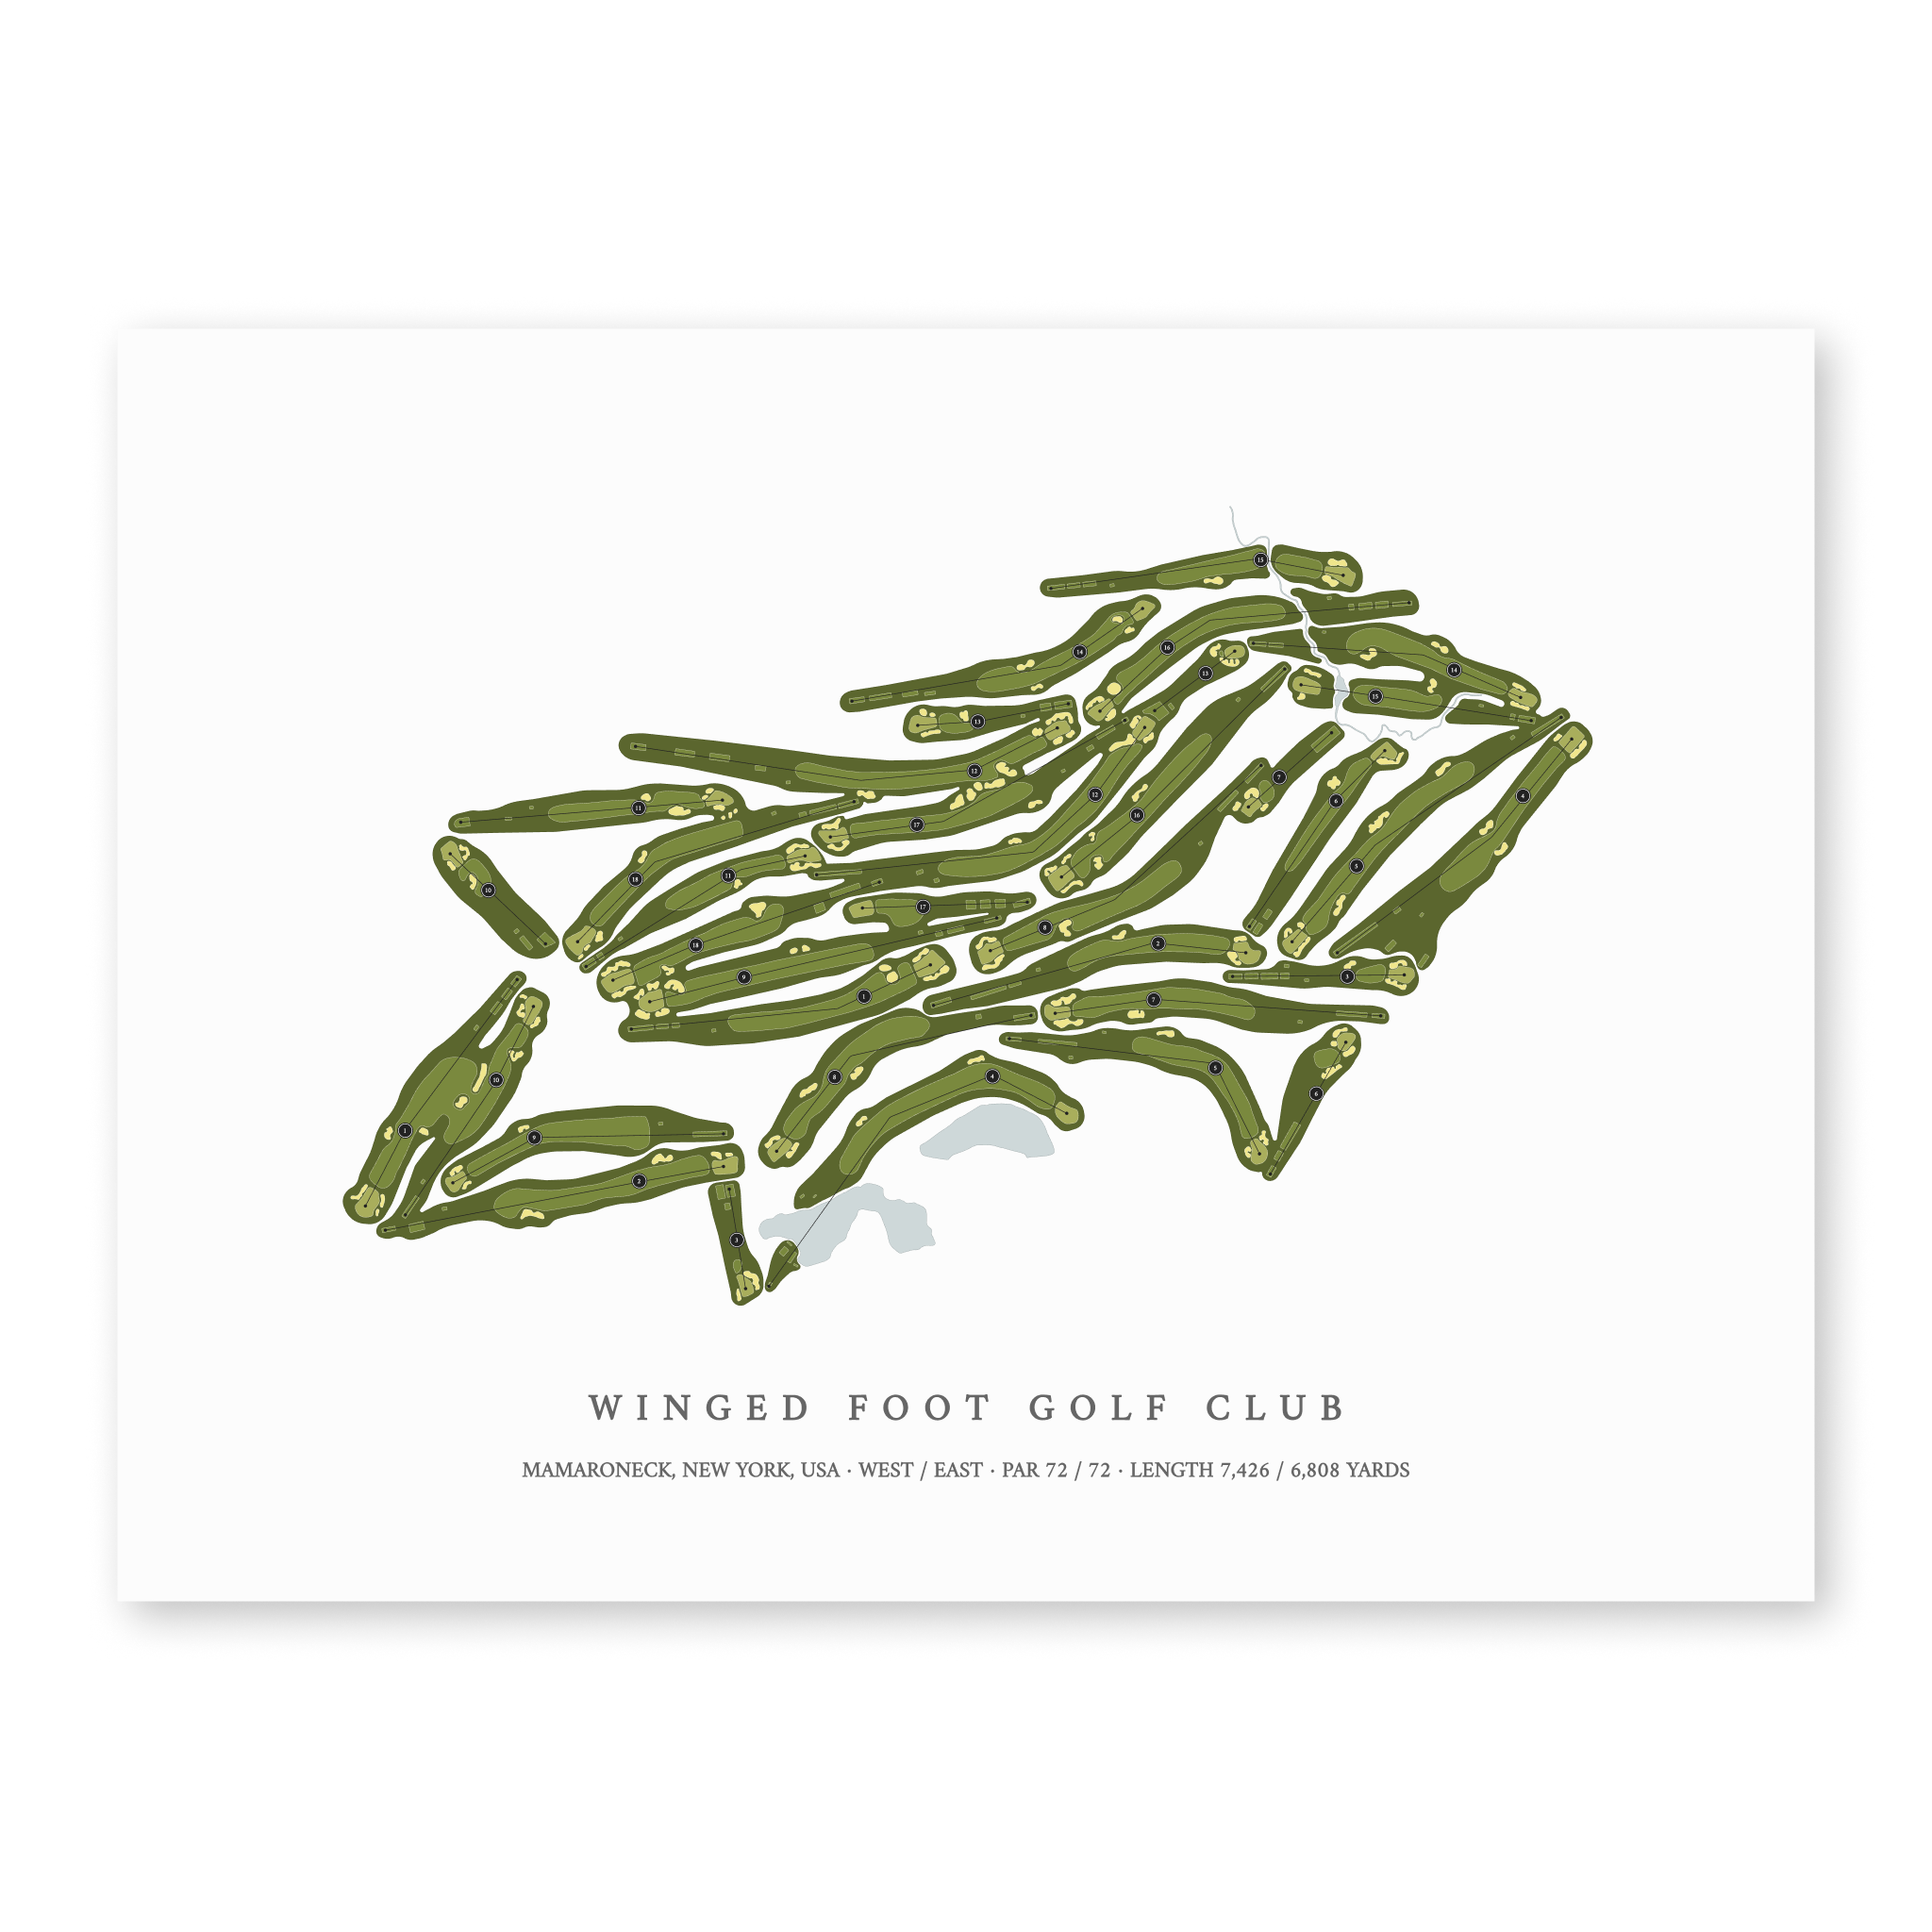 Winged Foot Golf Club| Golf Course Print | Unframed With Hole Numbers #hole numbers_yes